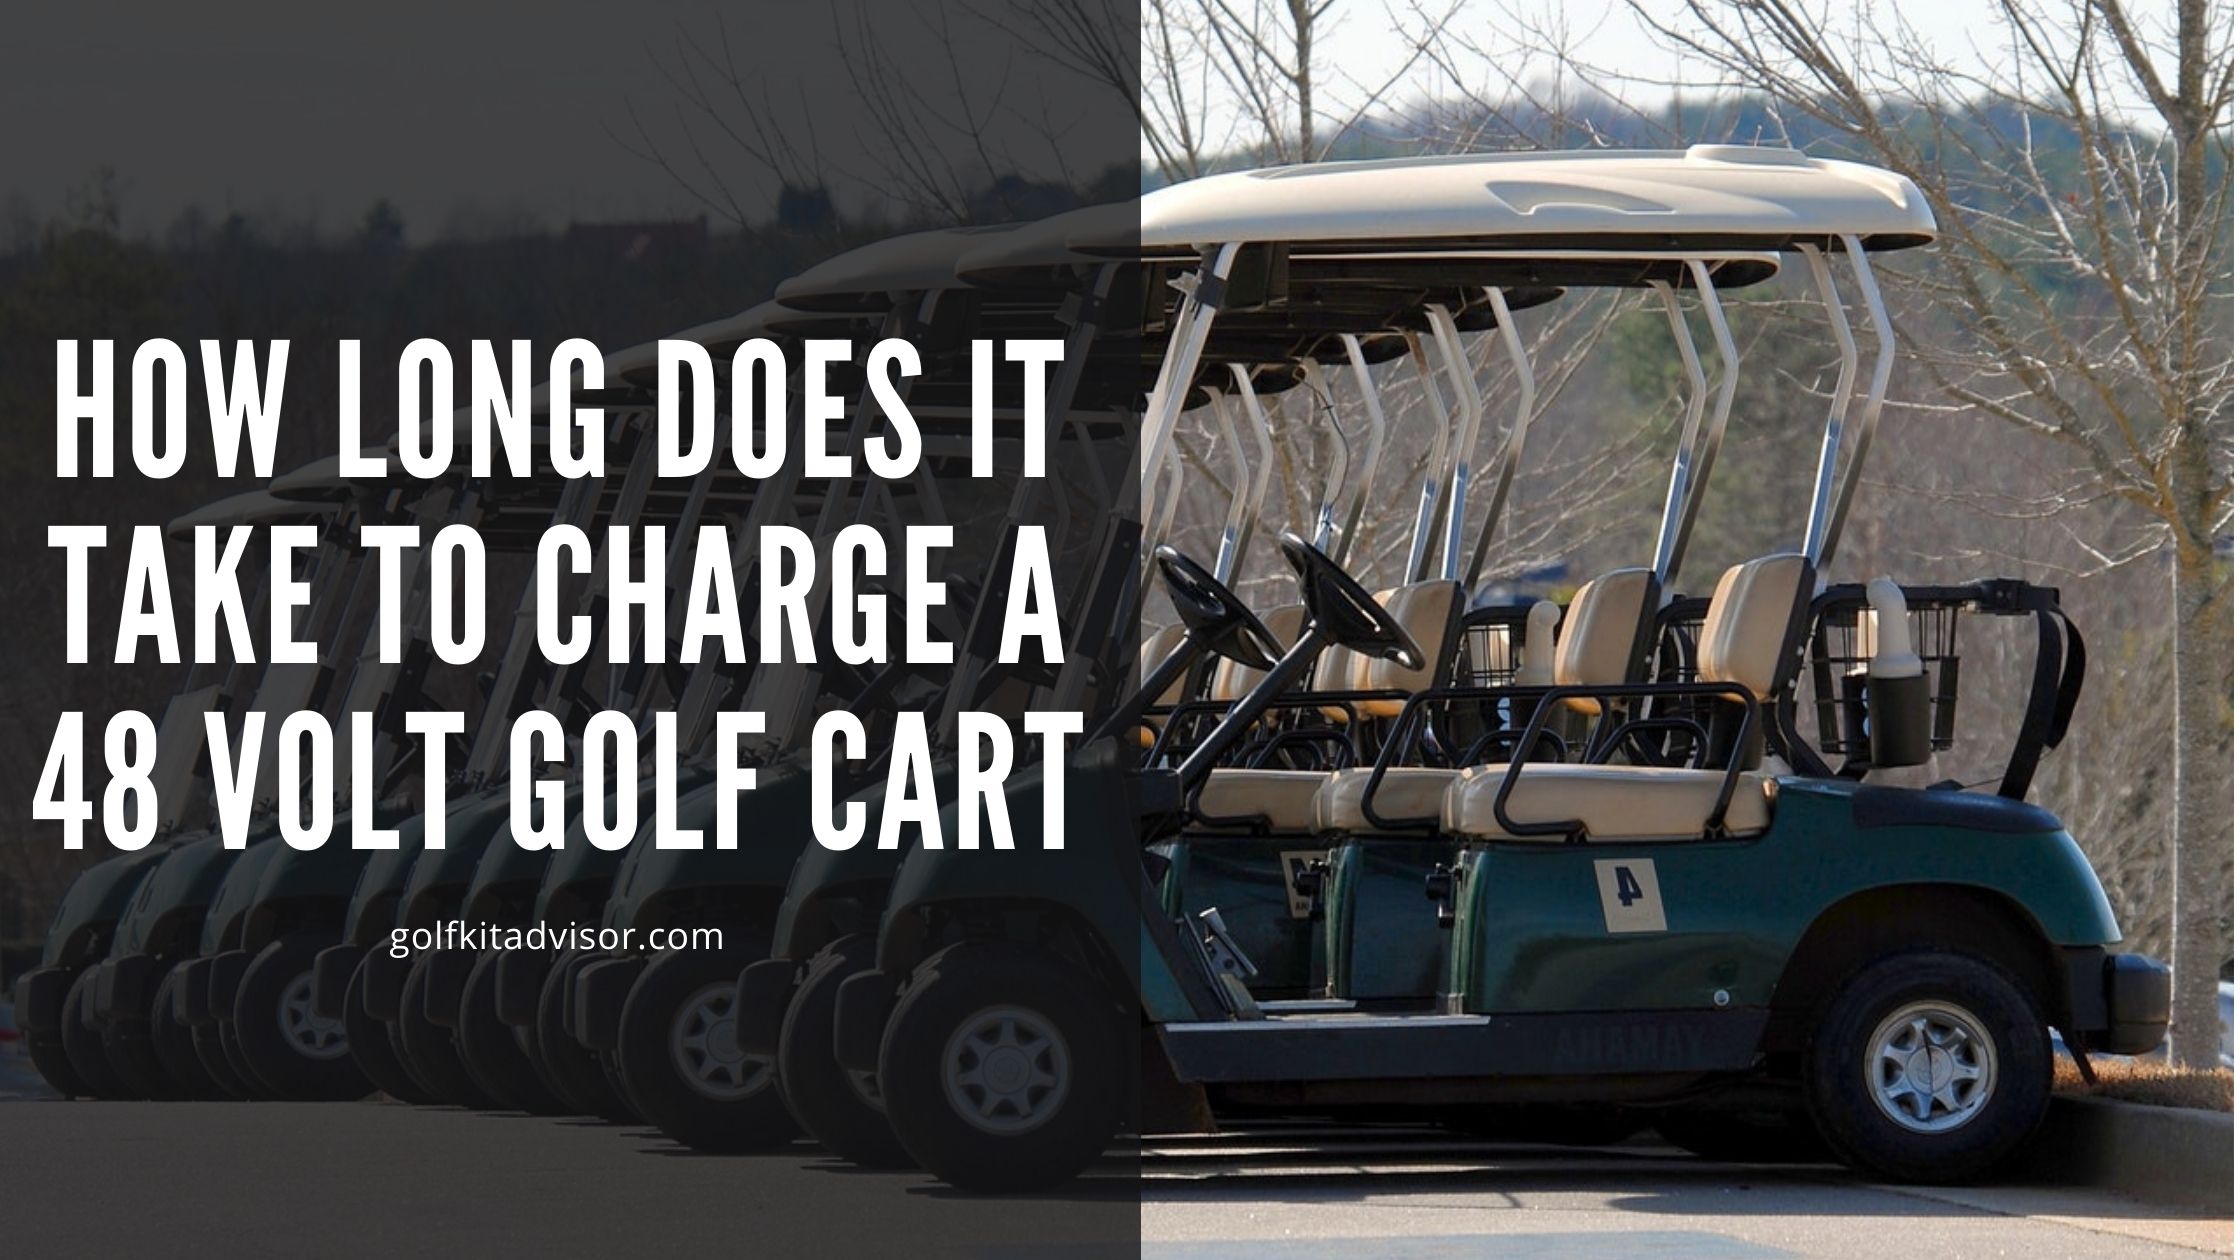 How Long Does It Take to Charge a 48 Volt Golf Cart